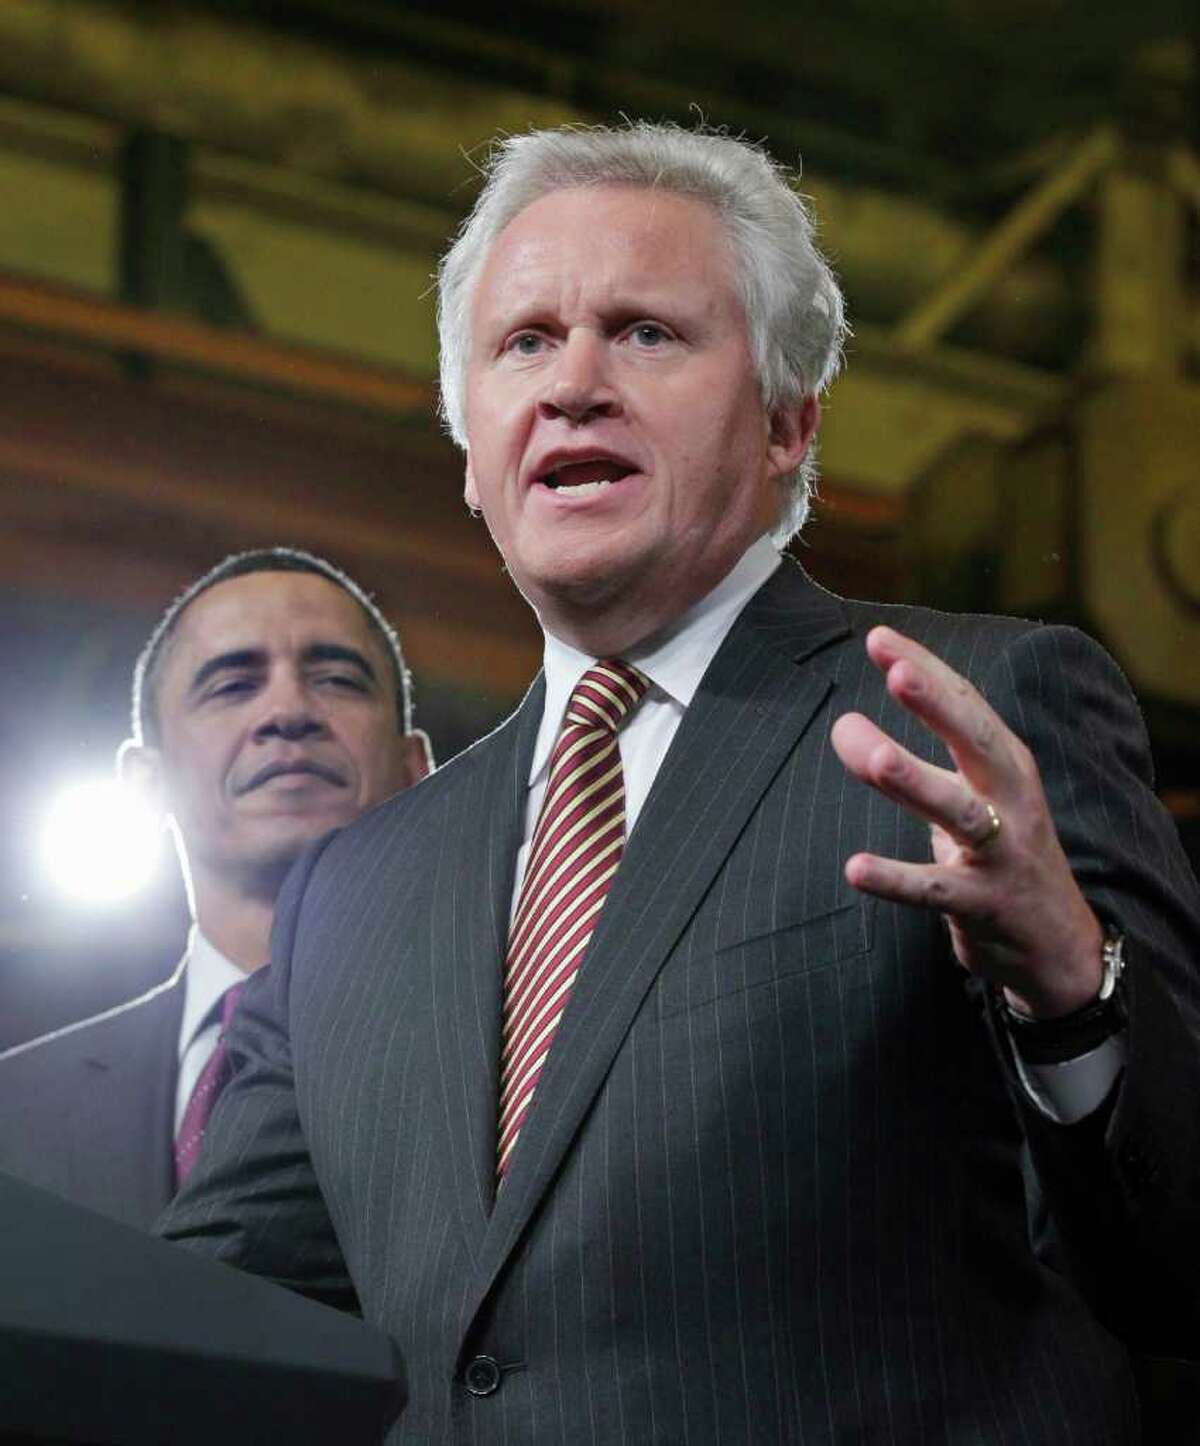 President Barack Obama is introduced by GE CEO Jeffrey Immelt as he visits the birthplace of the General Electric Co., Friday, Jan. 21, 2011, in Schenectady, N.Y. (AP Photo/J. Scott Applewhite)